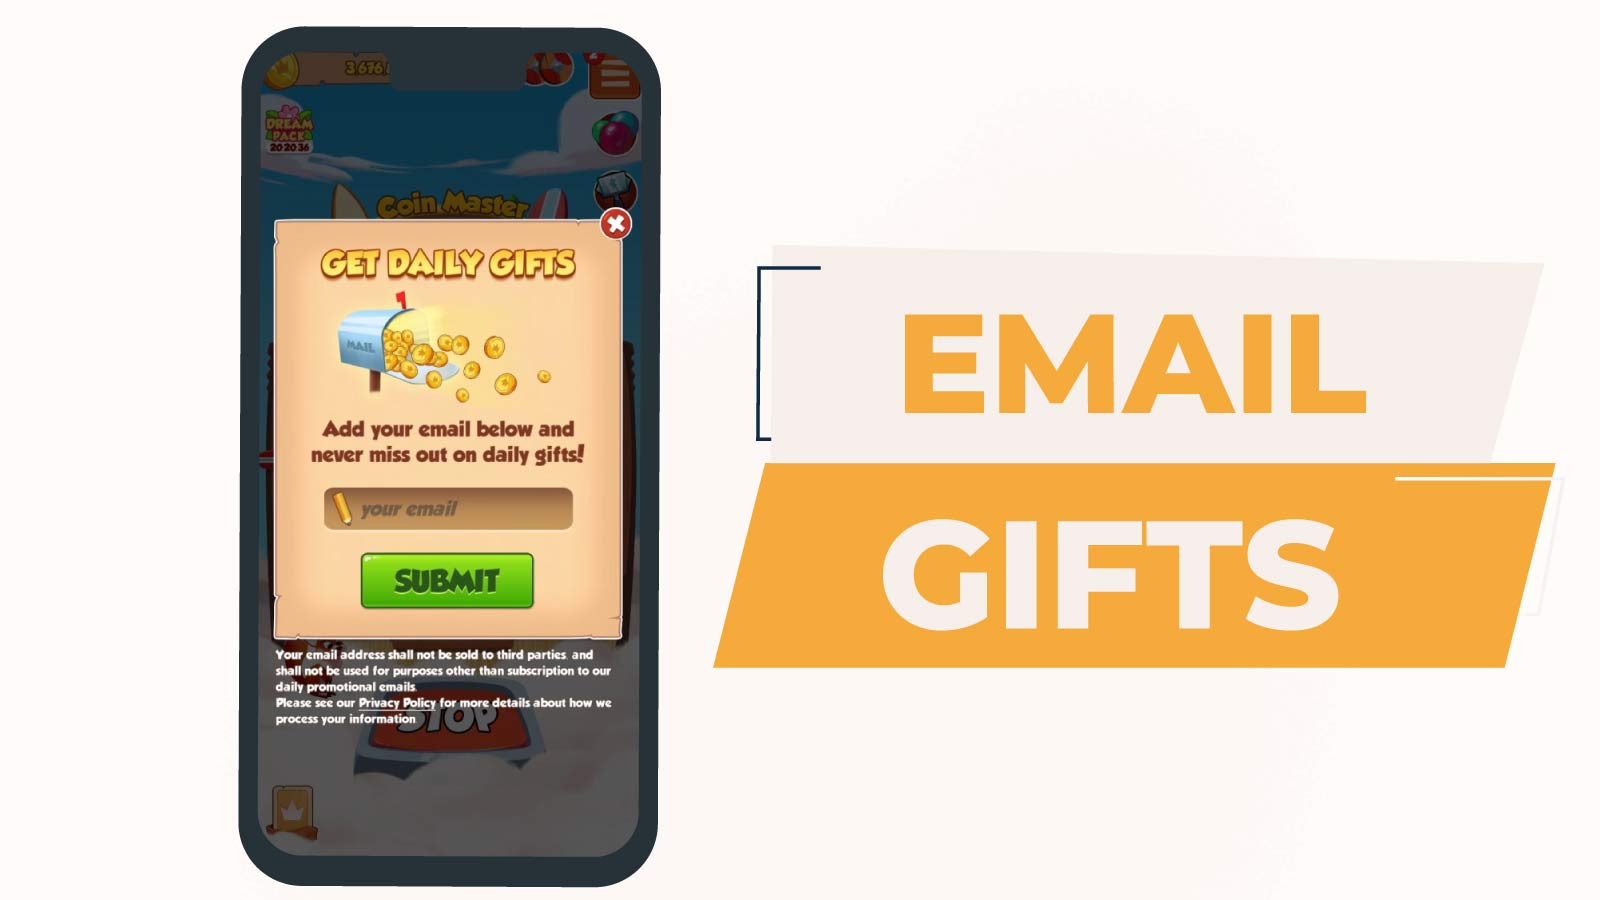 Sign Up for Email Gifts - Coin Master